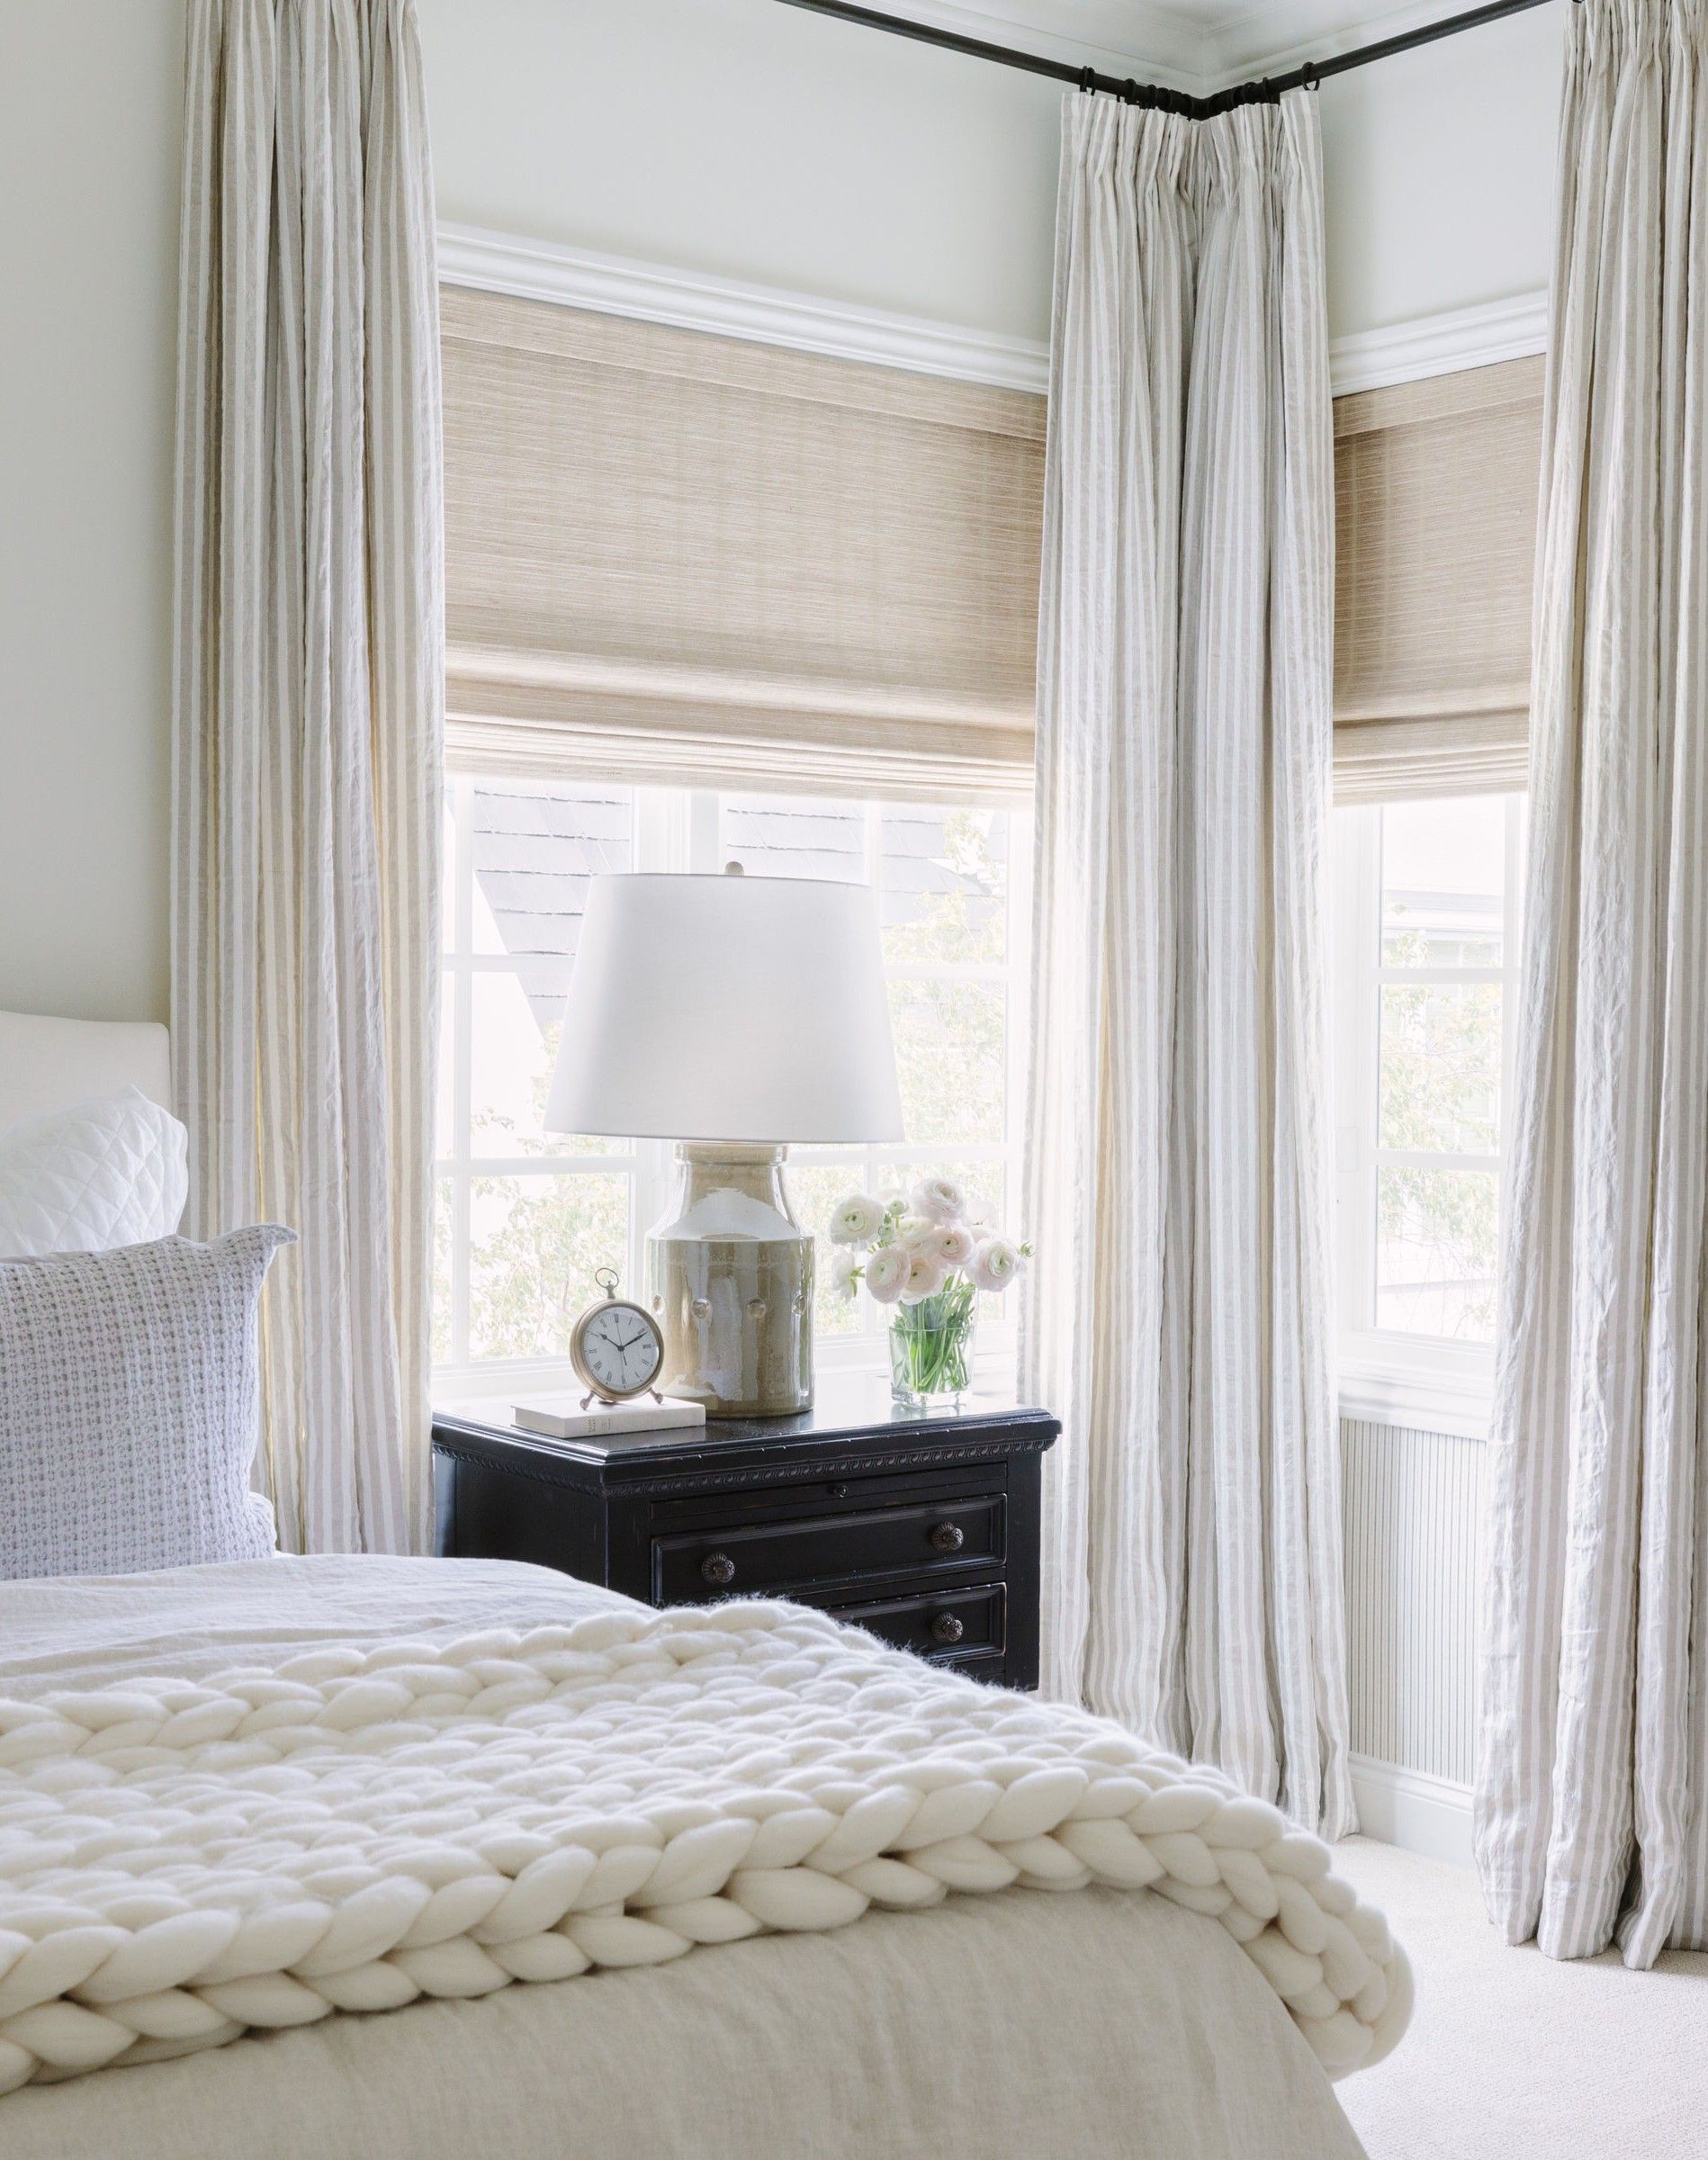 Cotton Curtain in White Shades Bedroom